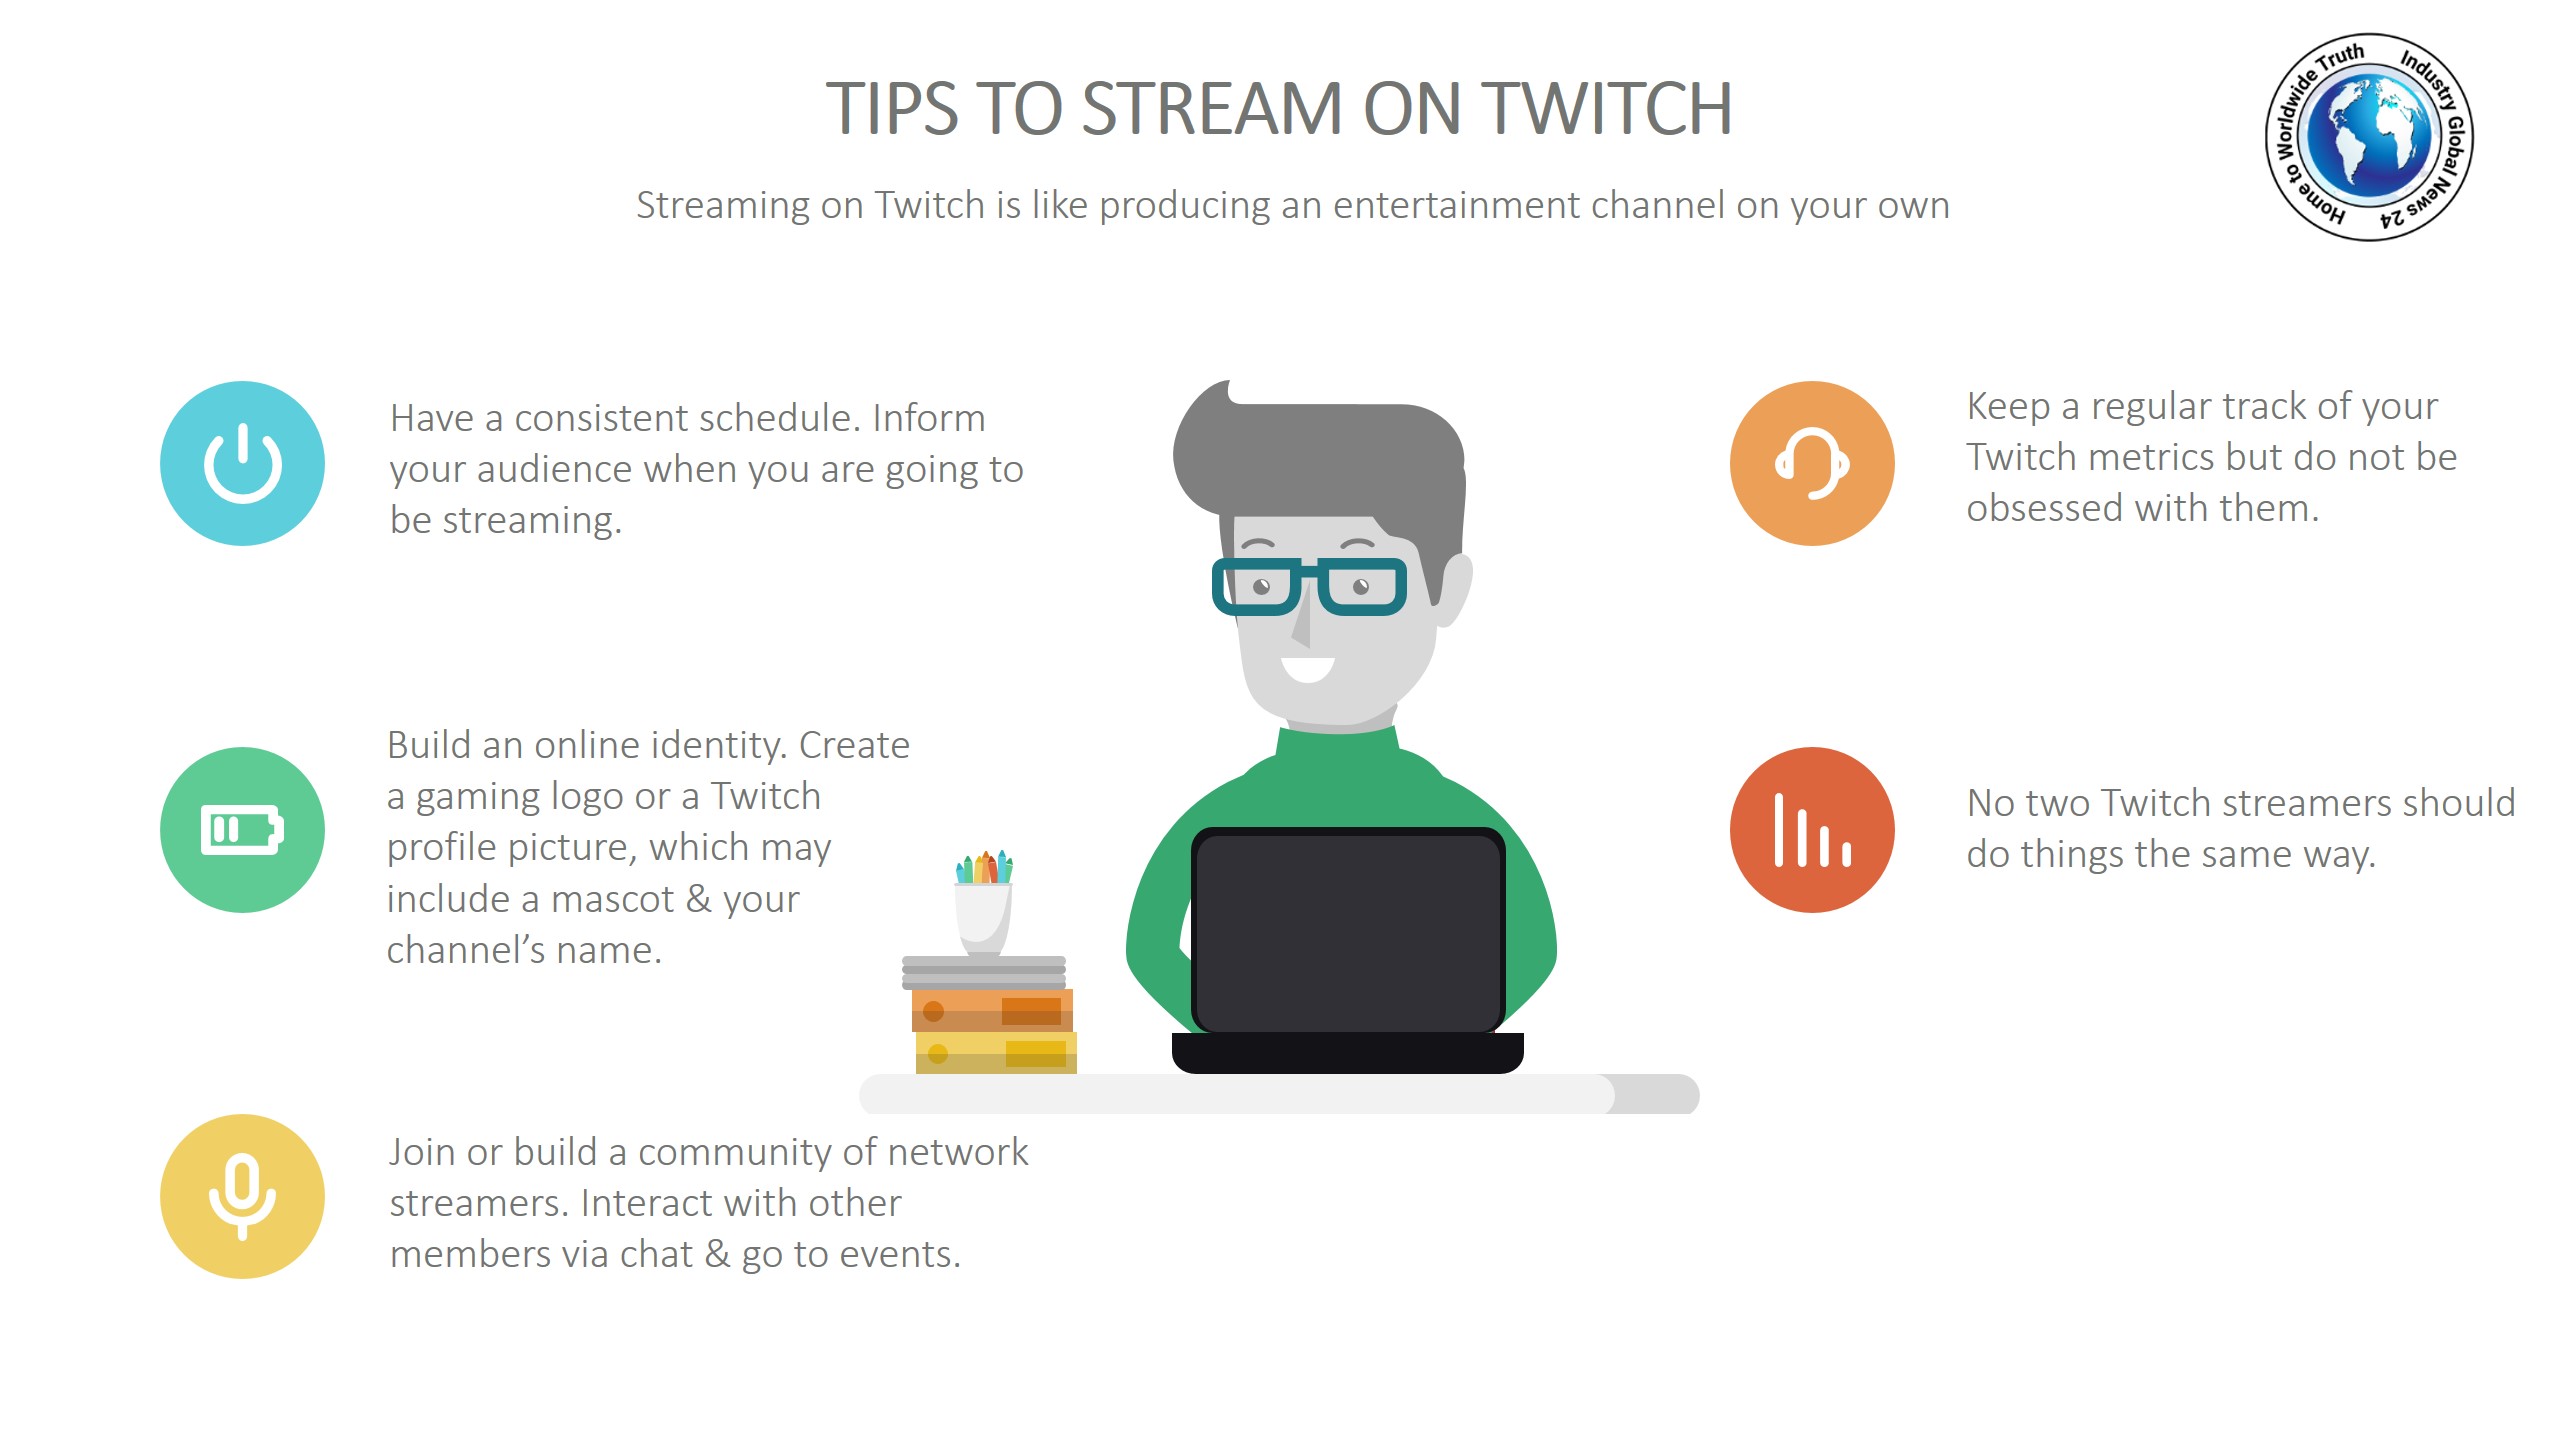 Tips to stream on Twitch